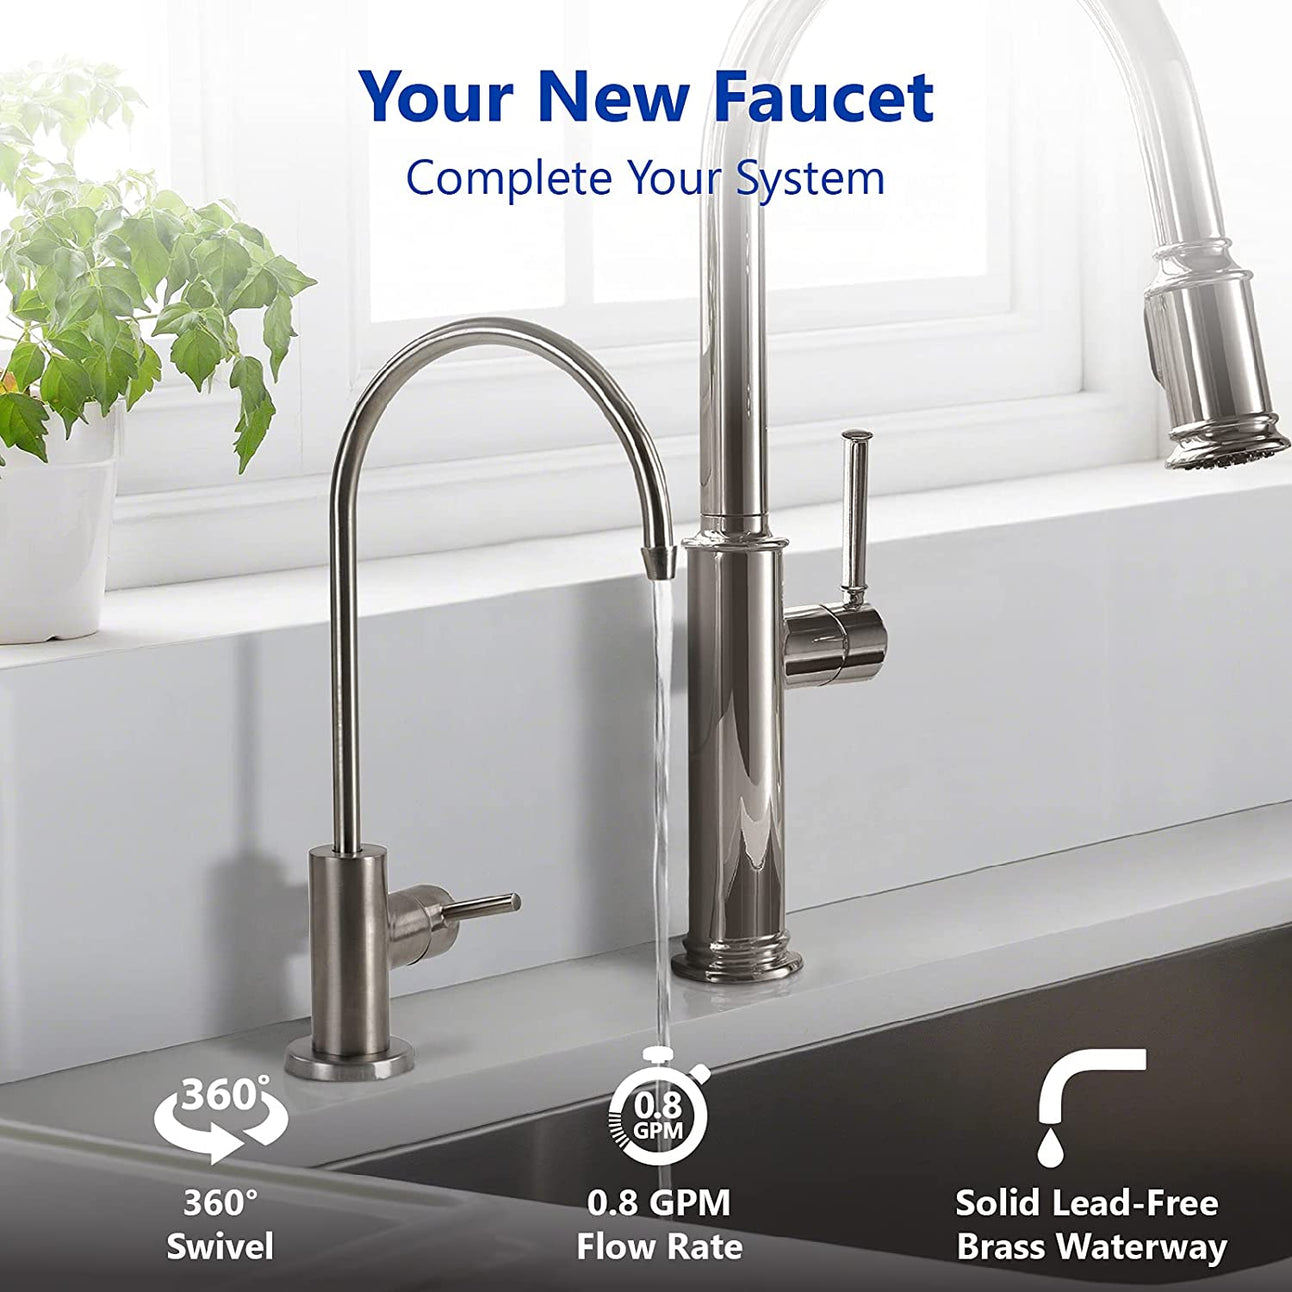 Express Water Modern Brushed Nickel Water Filter Faucet – Drinking Water Faucet – Reverse Osmosis Filtration System and Kitchen Sink Beverage Faucet – Simple 3-Piece Easy Install Faucet